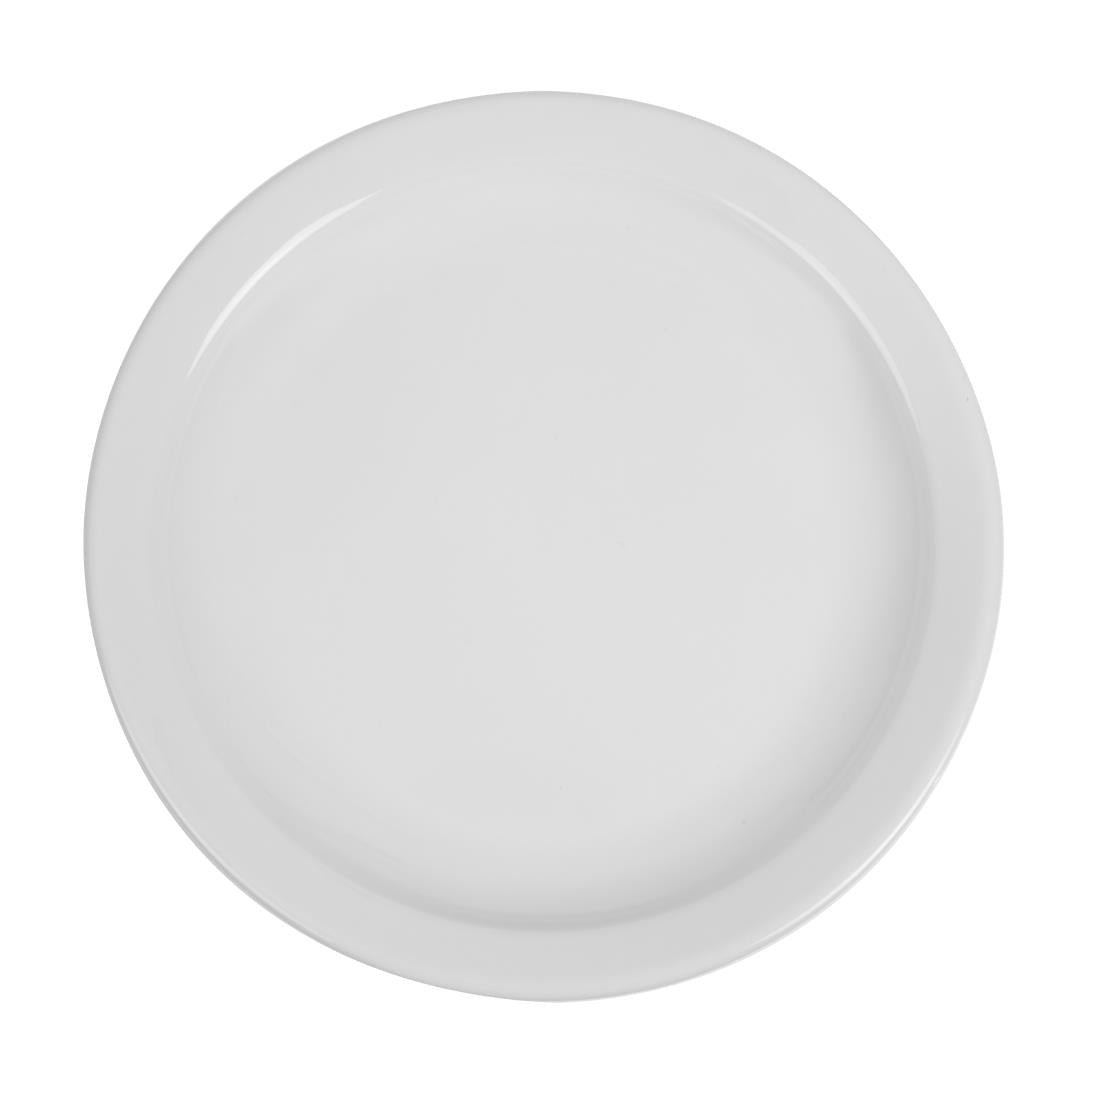 CB490 Olympia Whiteware Narrow Rimmed Plates 250mm (Pack of 12)